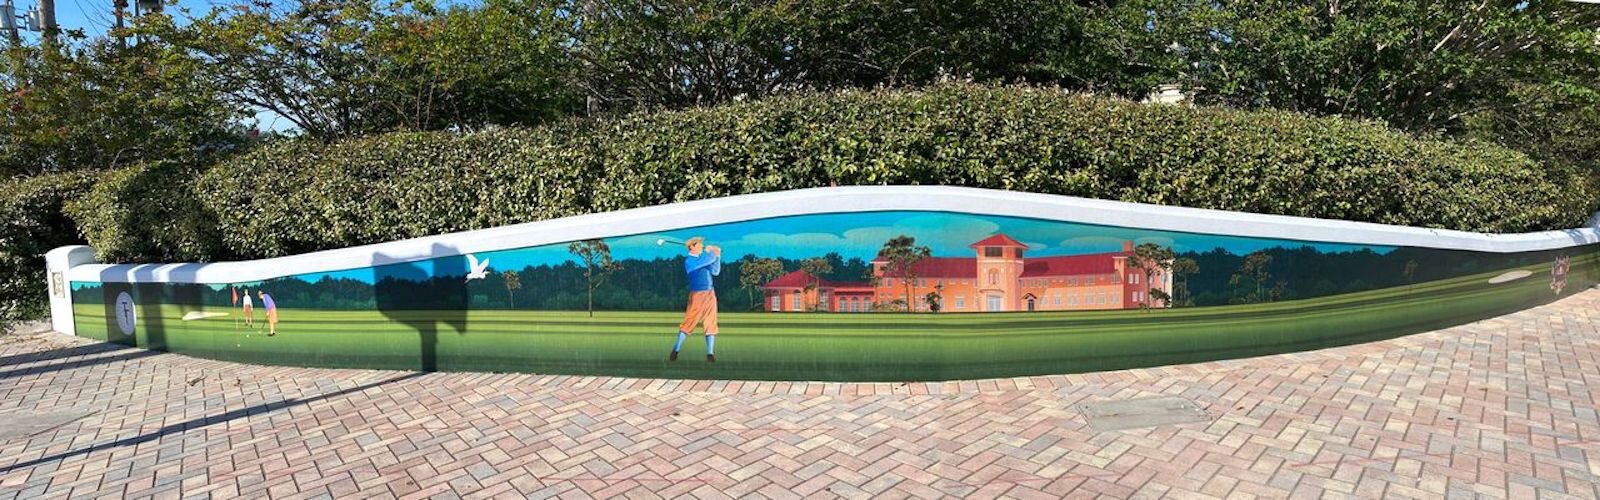 A Temple Terrace mural completed by Tim Boatwright, who was an ACHC grant winner in 2015 and 2018.